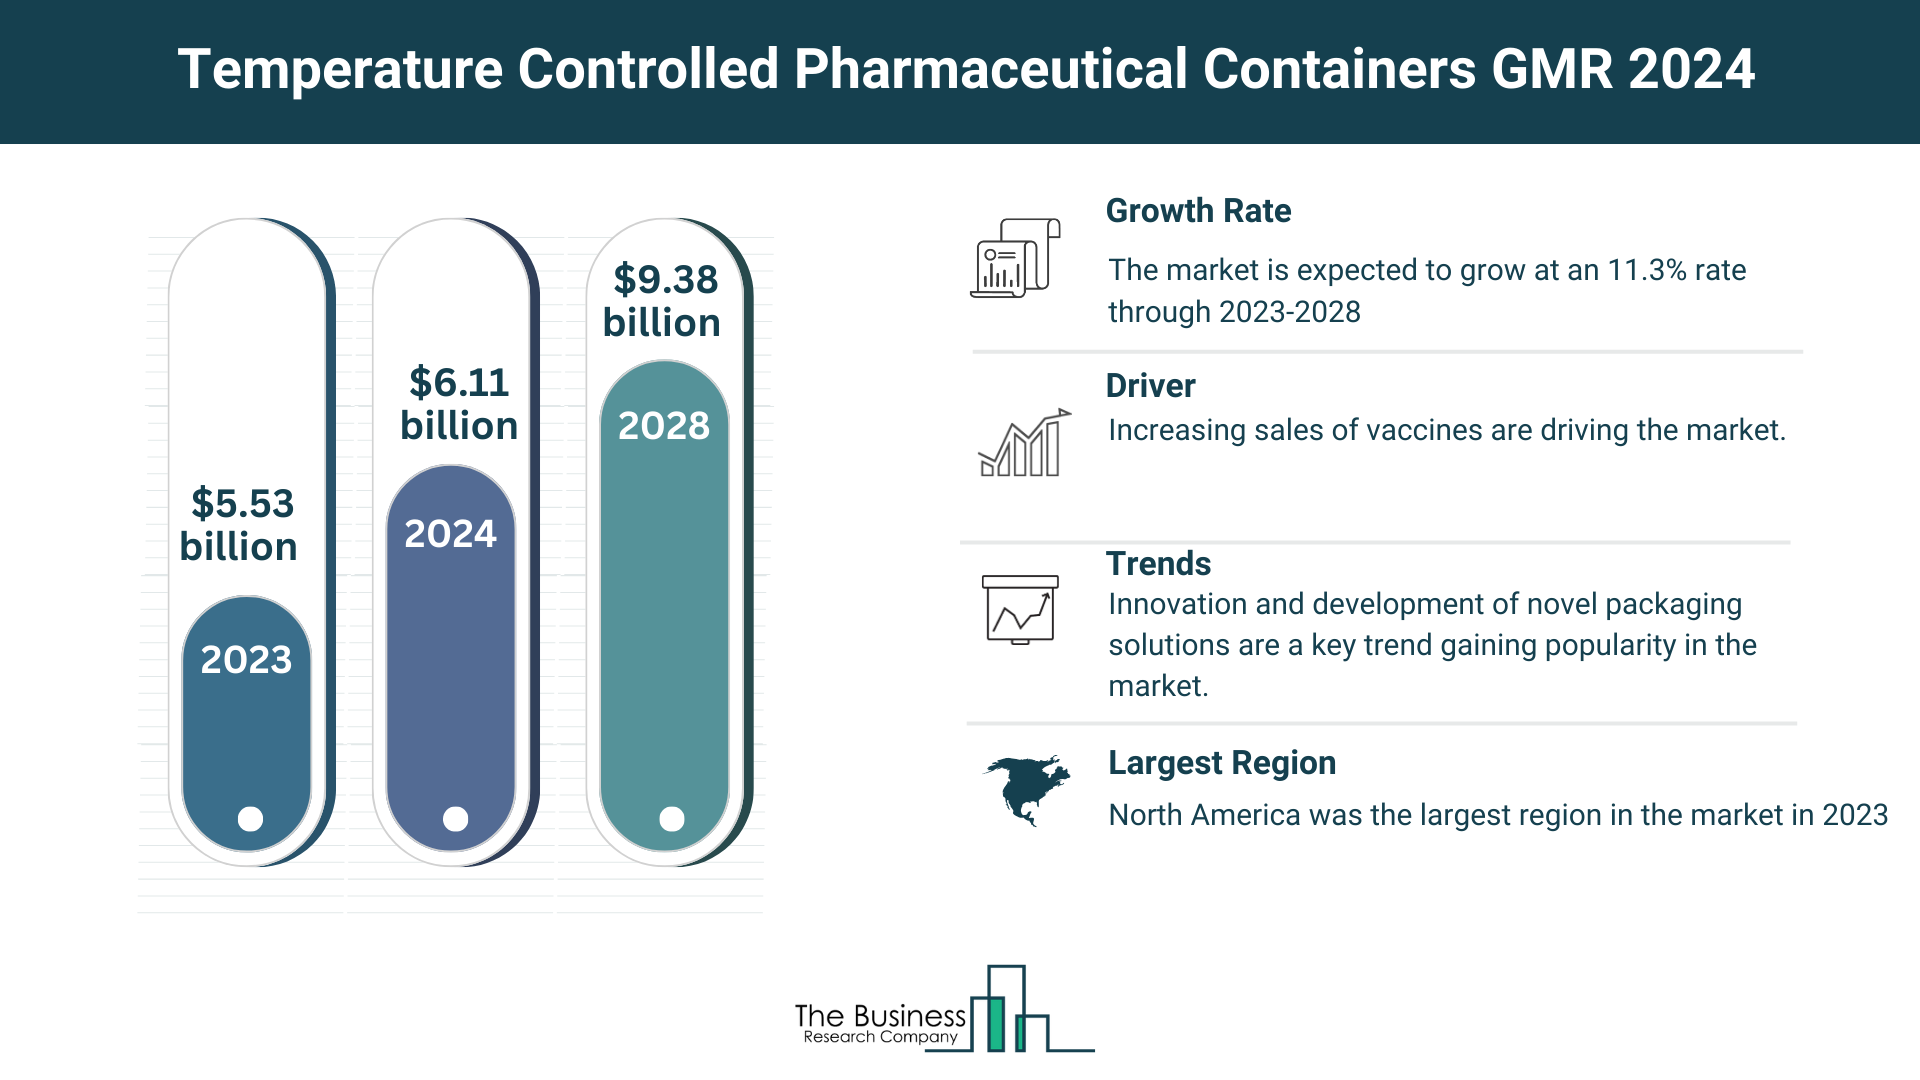 Global Temperature Controlled Pharmaceutical Containers Market Report 2024: Size, Drivers, And Top Segments